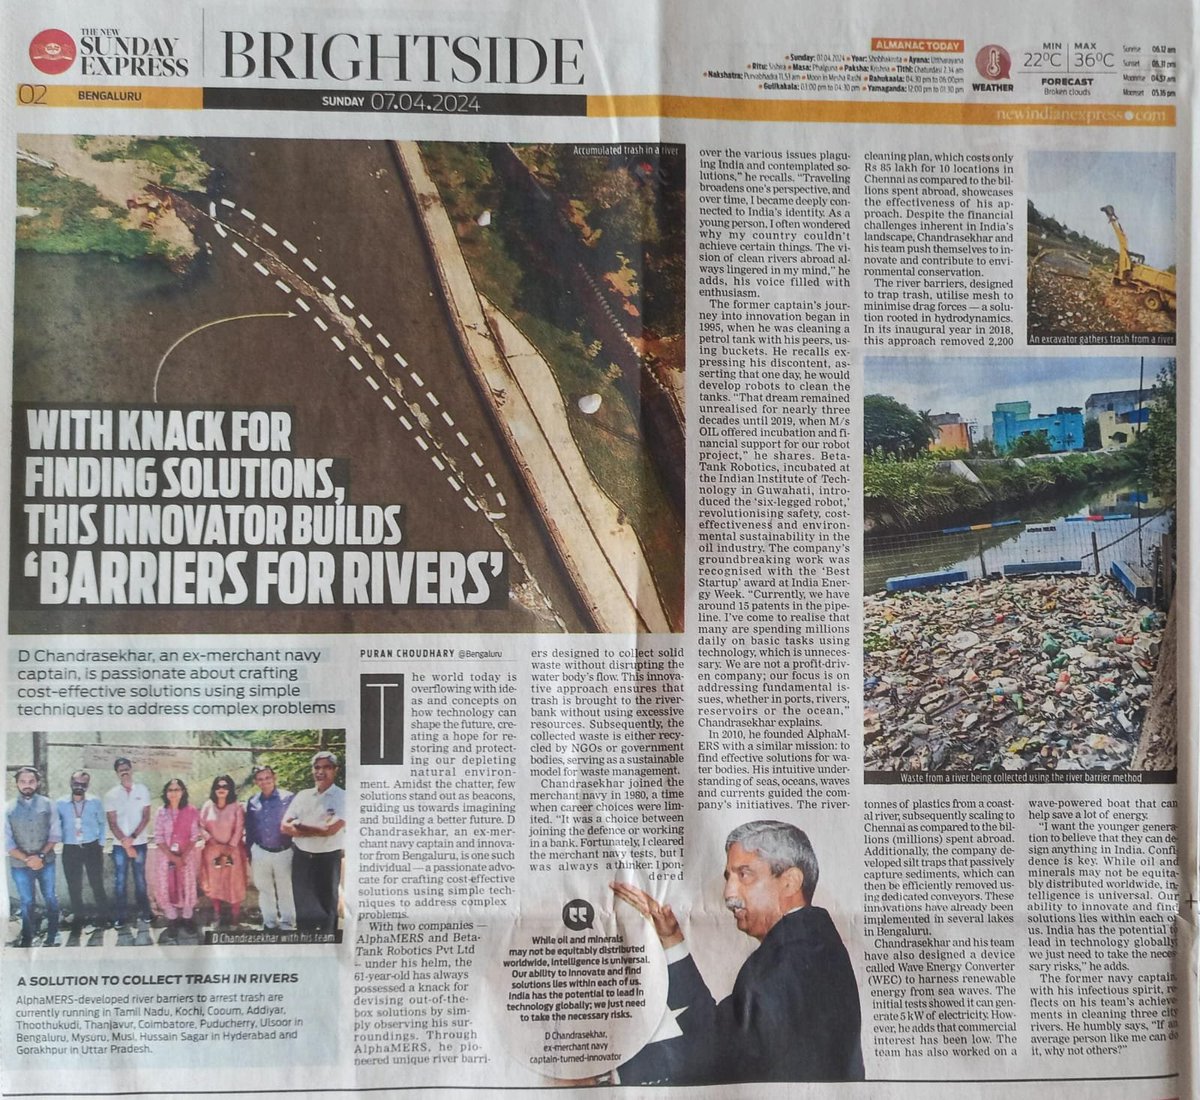 An excellent coverage of our work and thoughts by Ms.Puran Choudhury of New Indian Express.
#sustainability #innovation #plastics #India #rivercleanup #oceancleanup